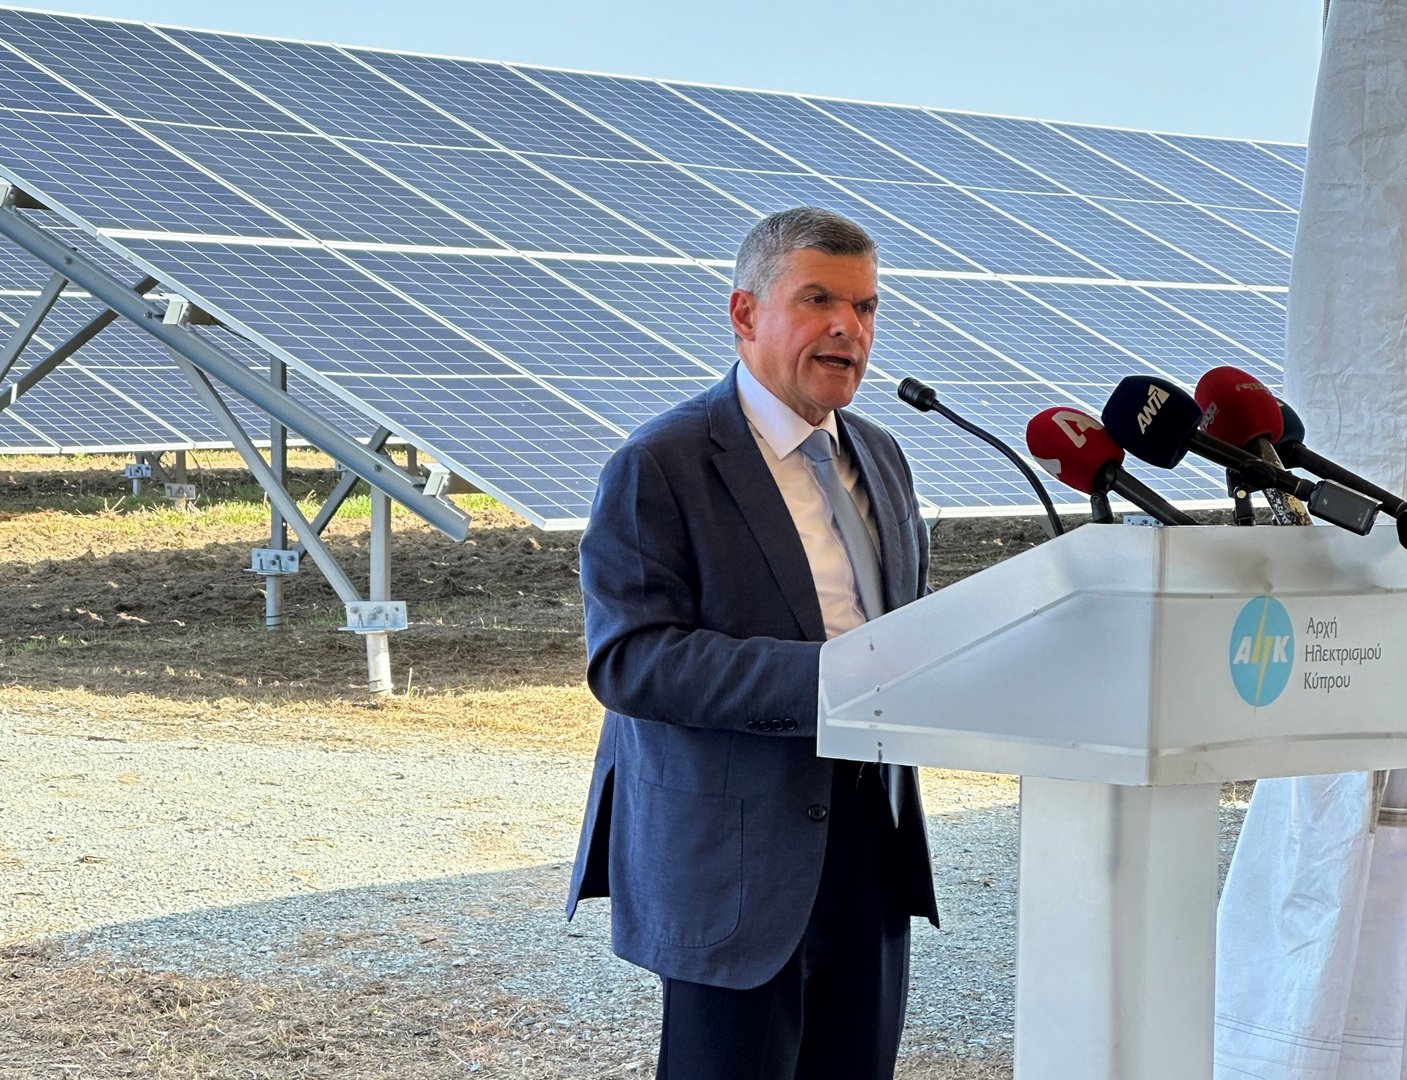 image EAC’s new photovoltaic park inaugurated (updated)